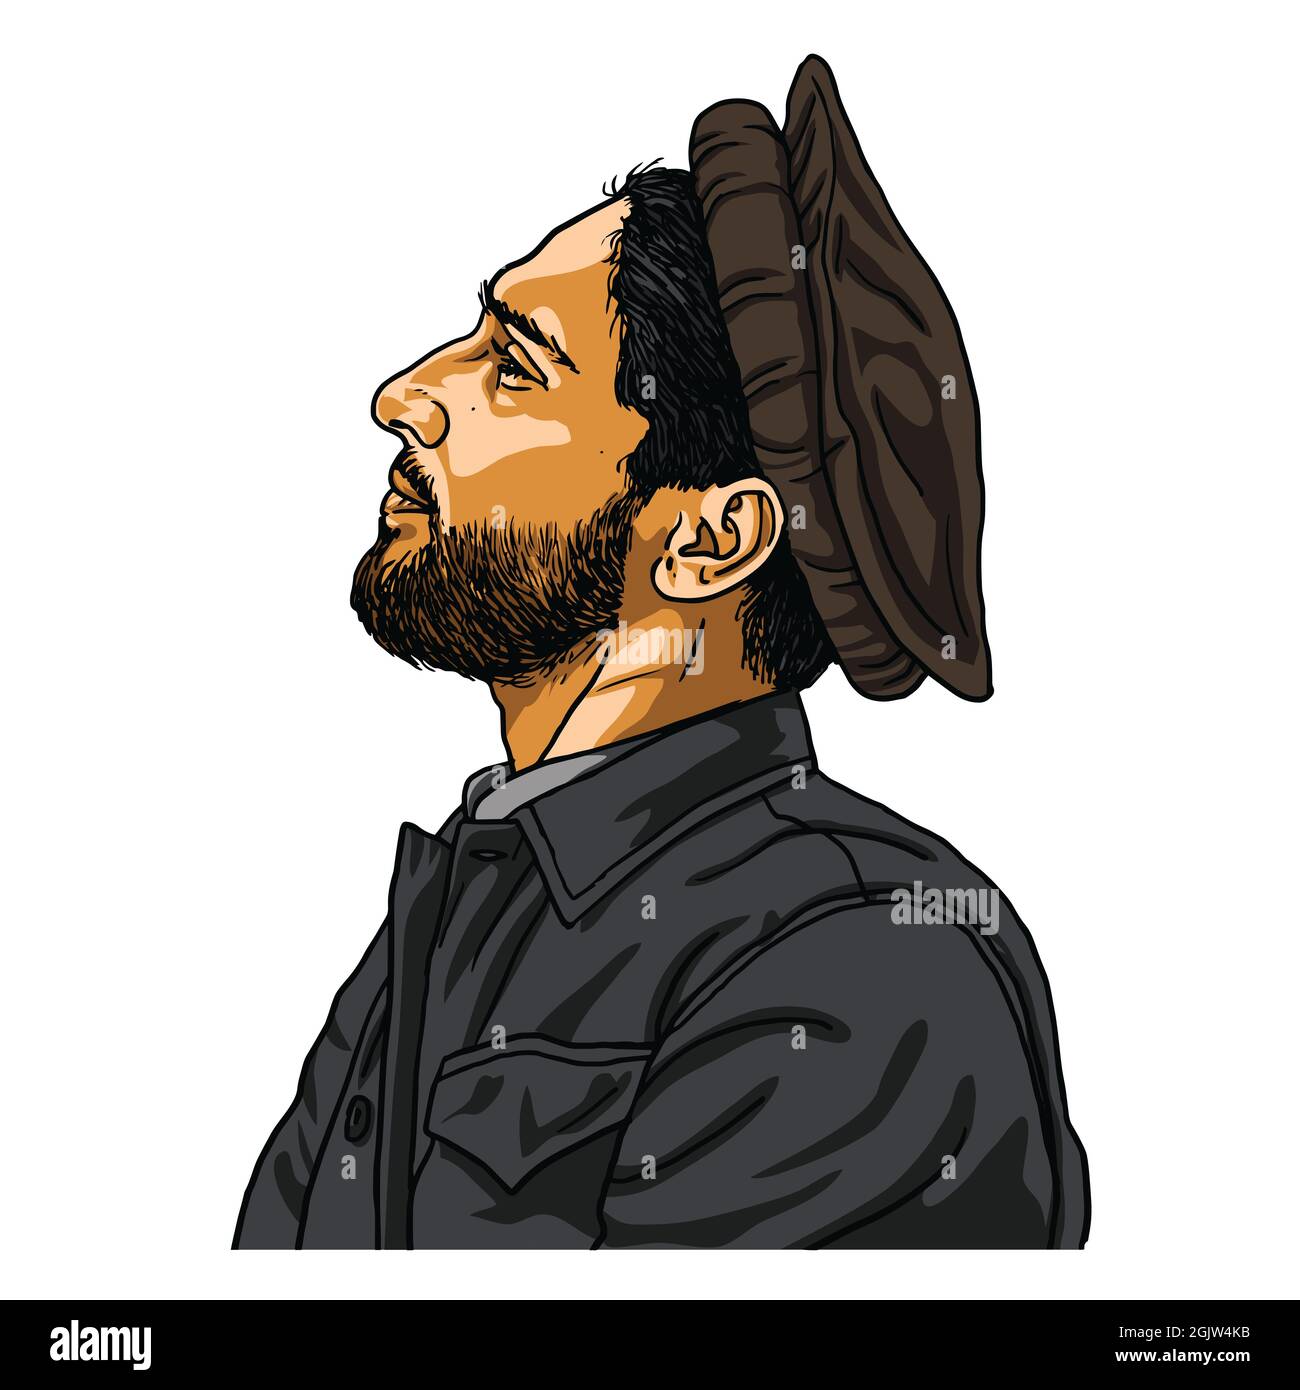 Ahmad Massoud The leader of the National Resistance Front of Afghanistan Vector Cartoon Caricature Drawing Illustration. Panjshir, Afghanistan Stock Vector